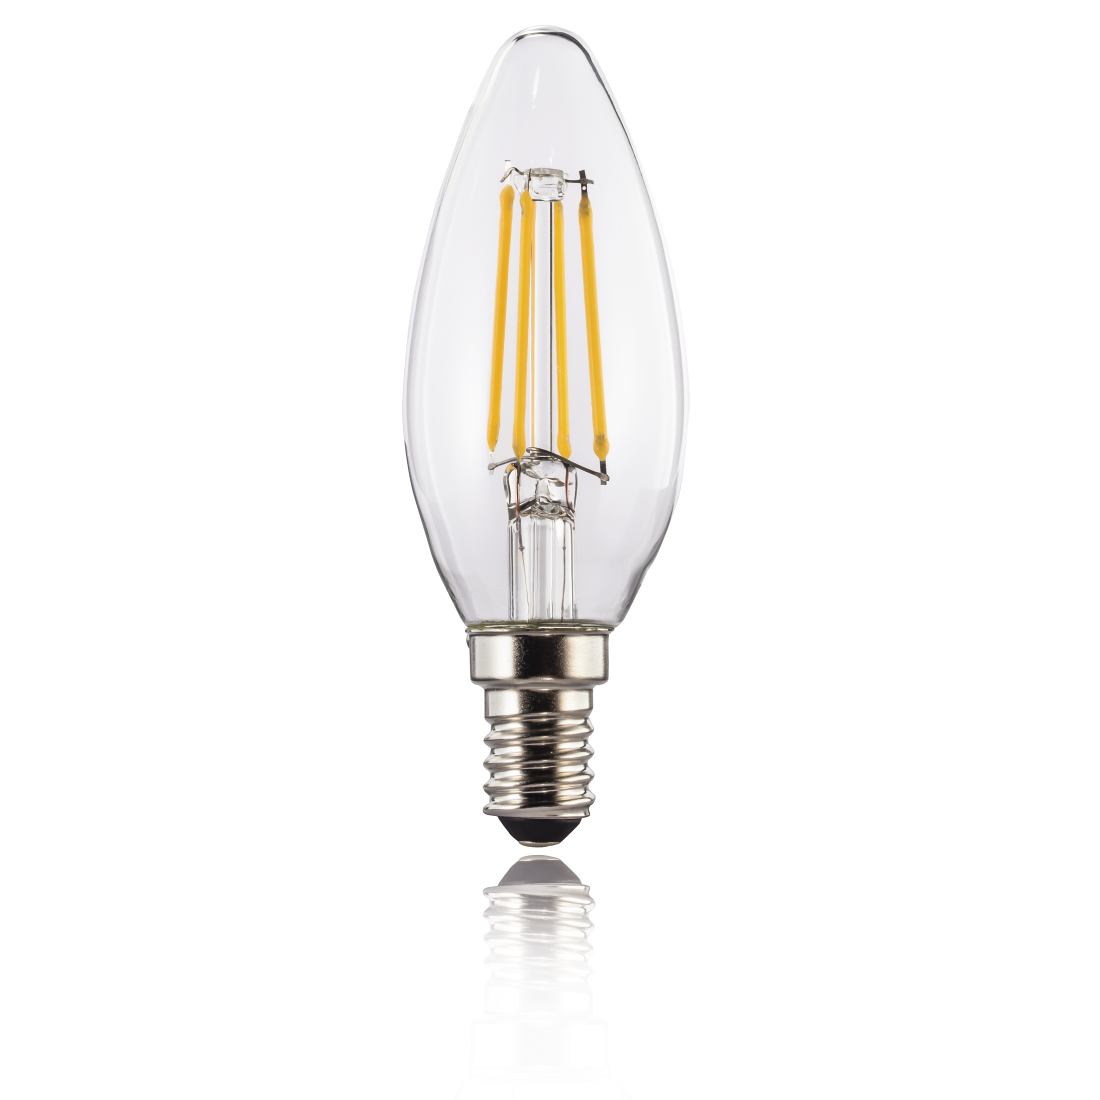 abx2 High-Res Image 2 - Xavax, LED Filament, E14, 470 lm Replaces 40 W, Candle Bulb, warm white, clear